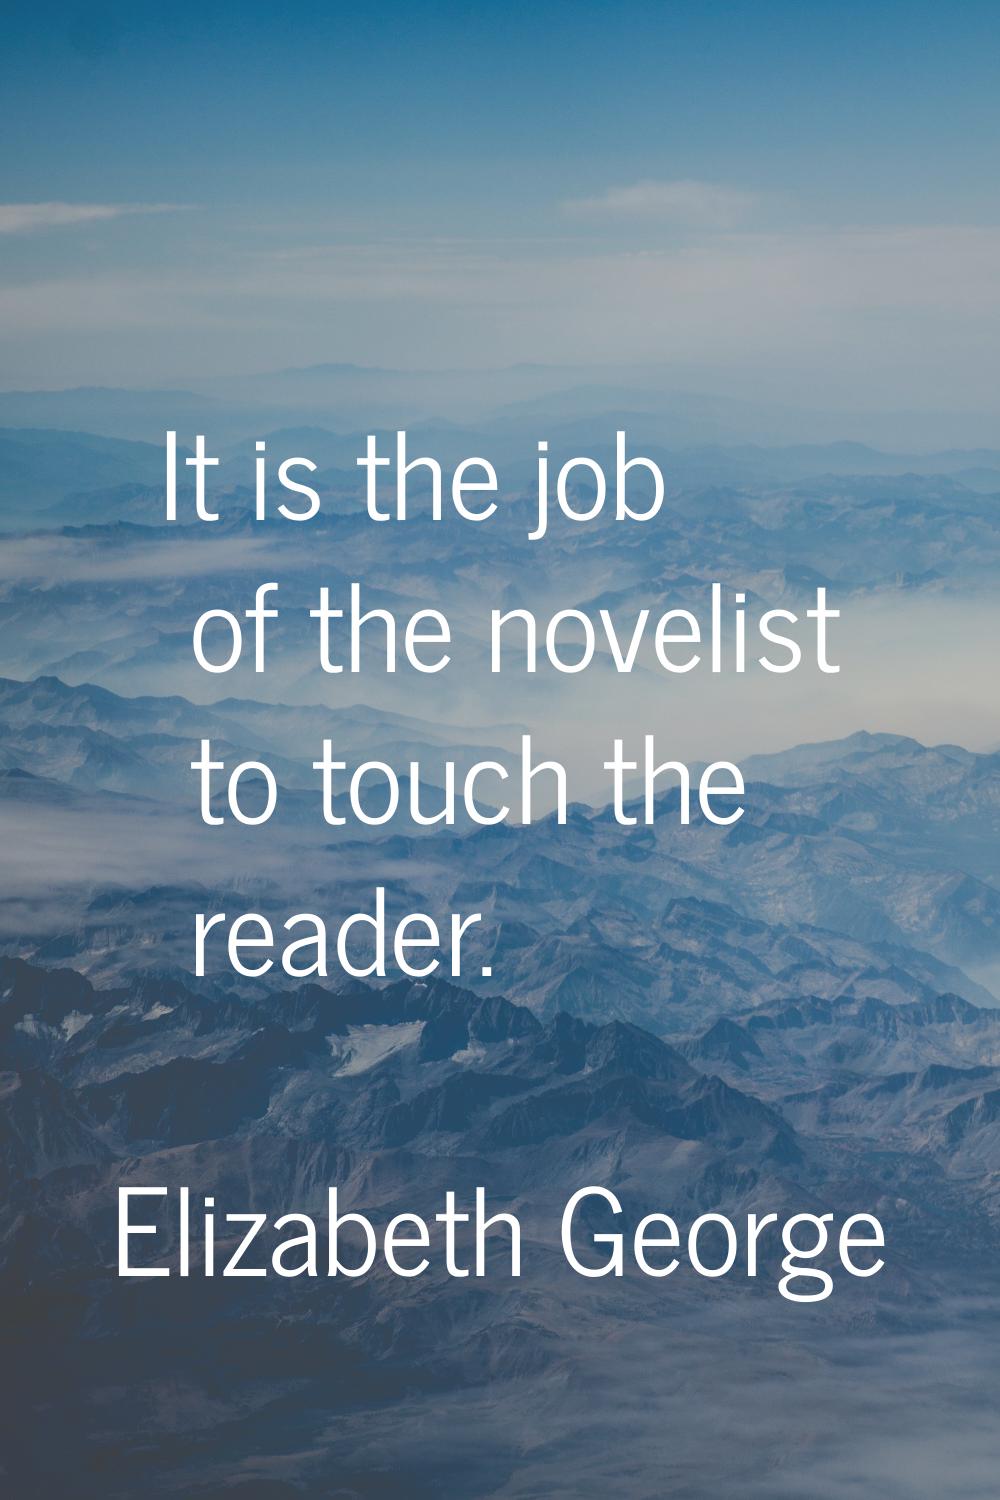 It is the job of the novelist to touch the reader.